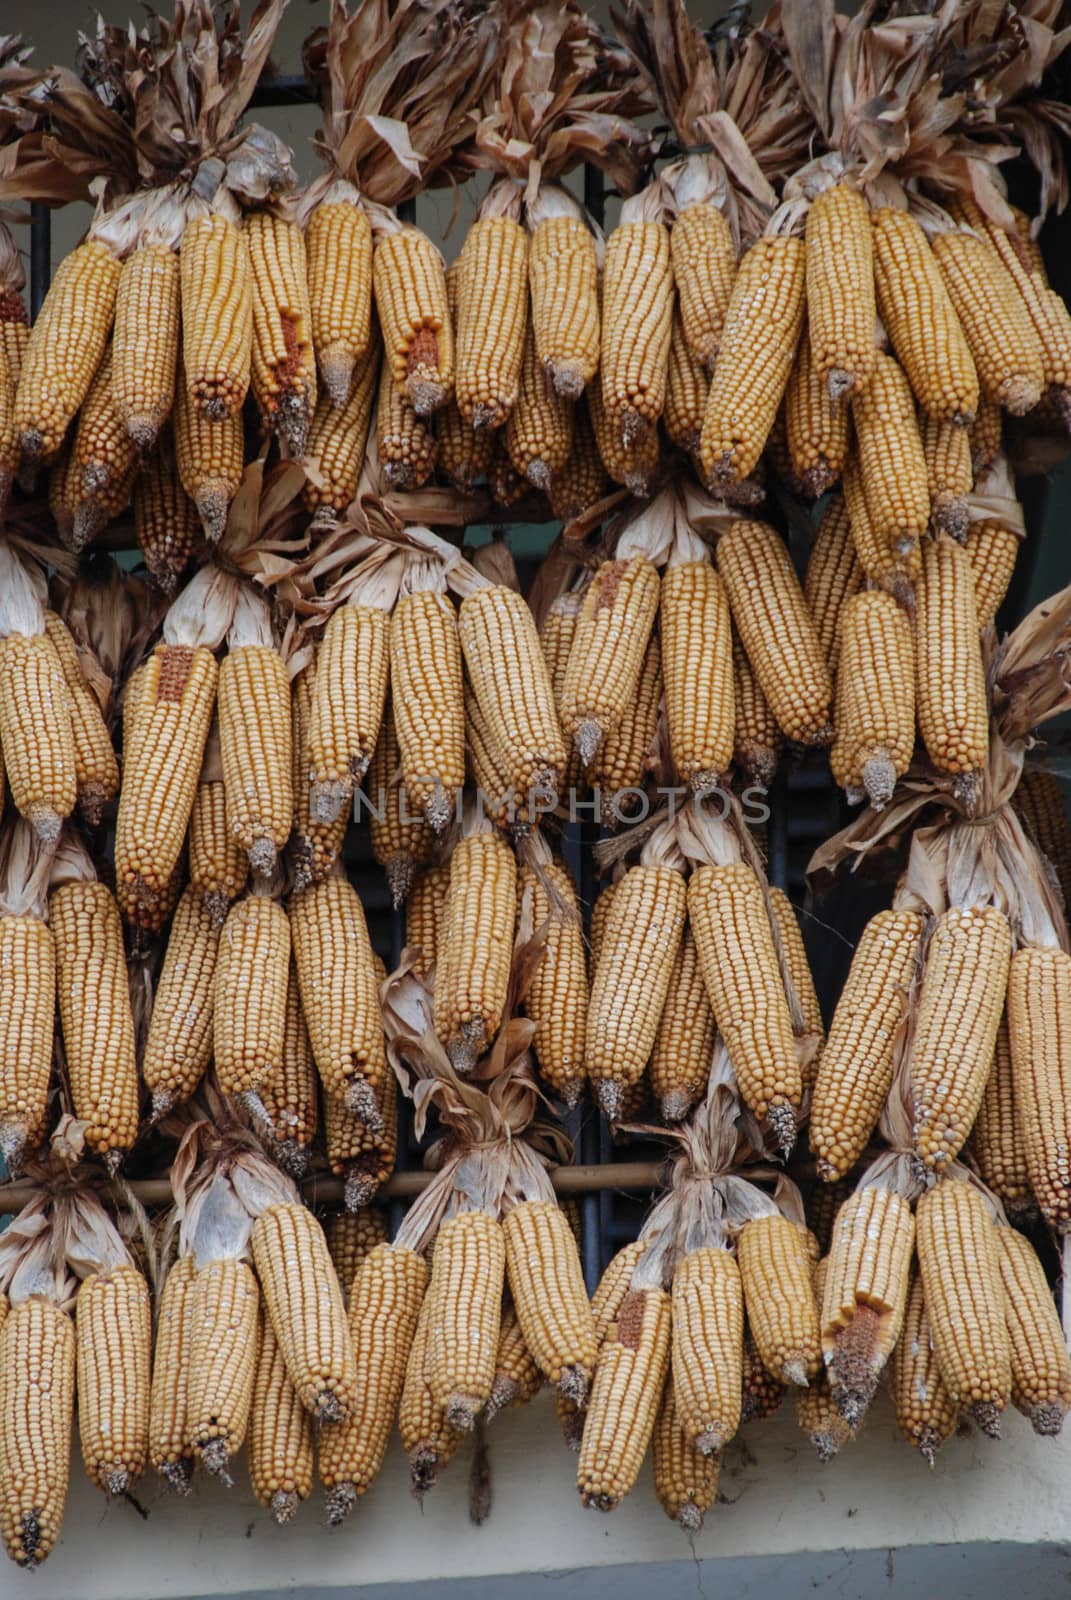 Corn cobs interwoven with each other to dry